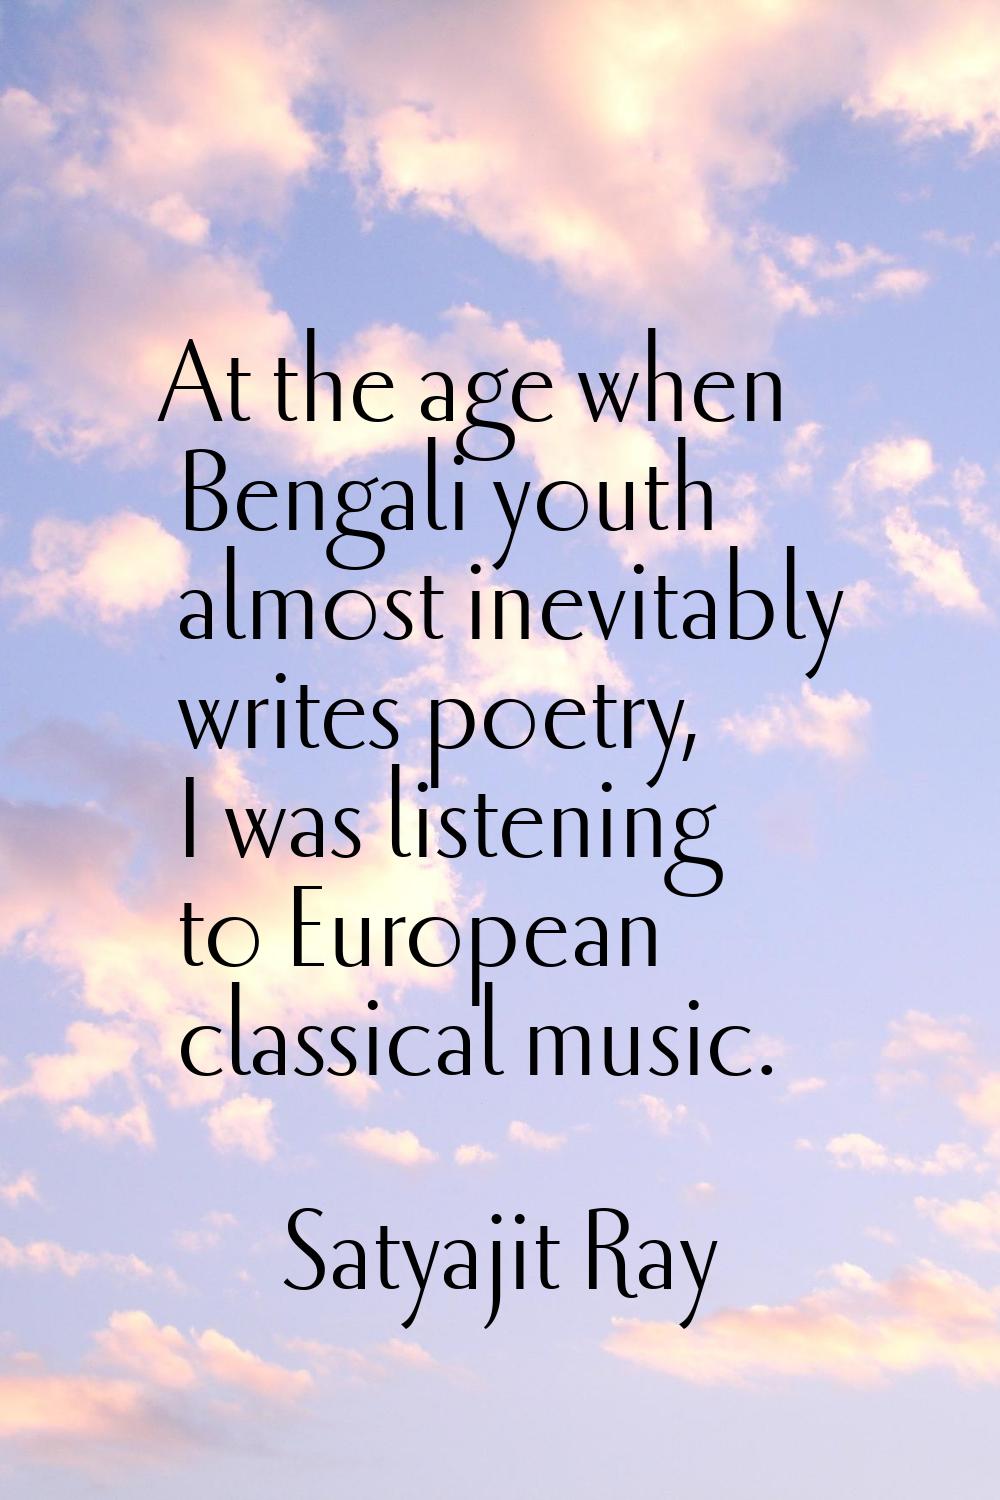 At the age when Bengali youth almost inevitably writes poetry, I was listening to European classica